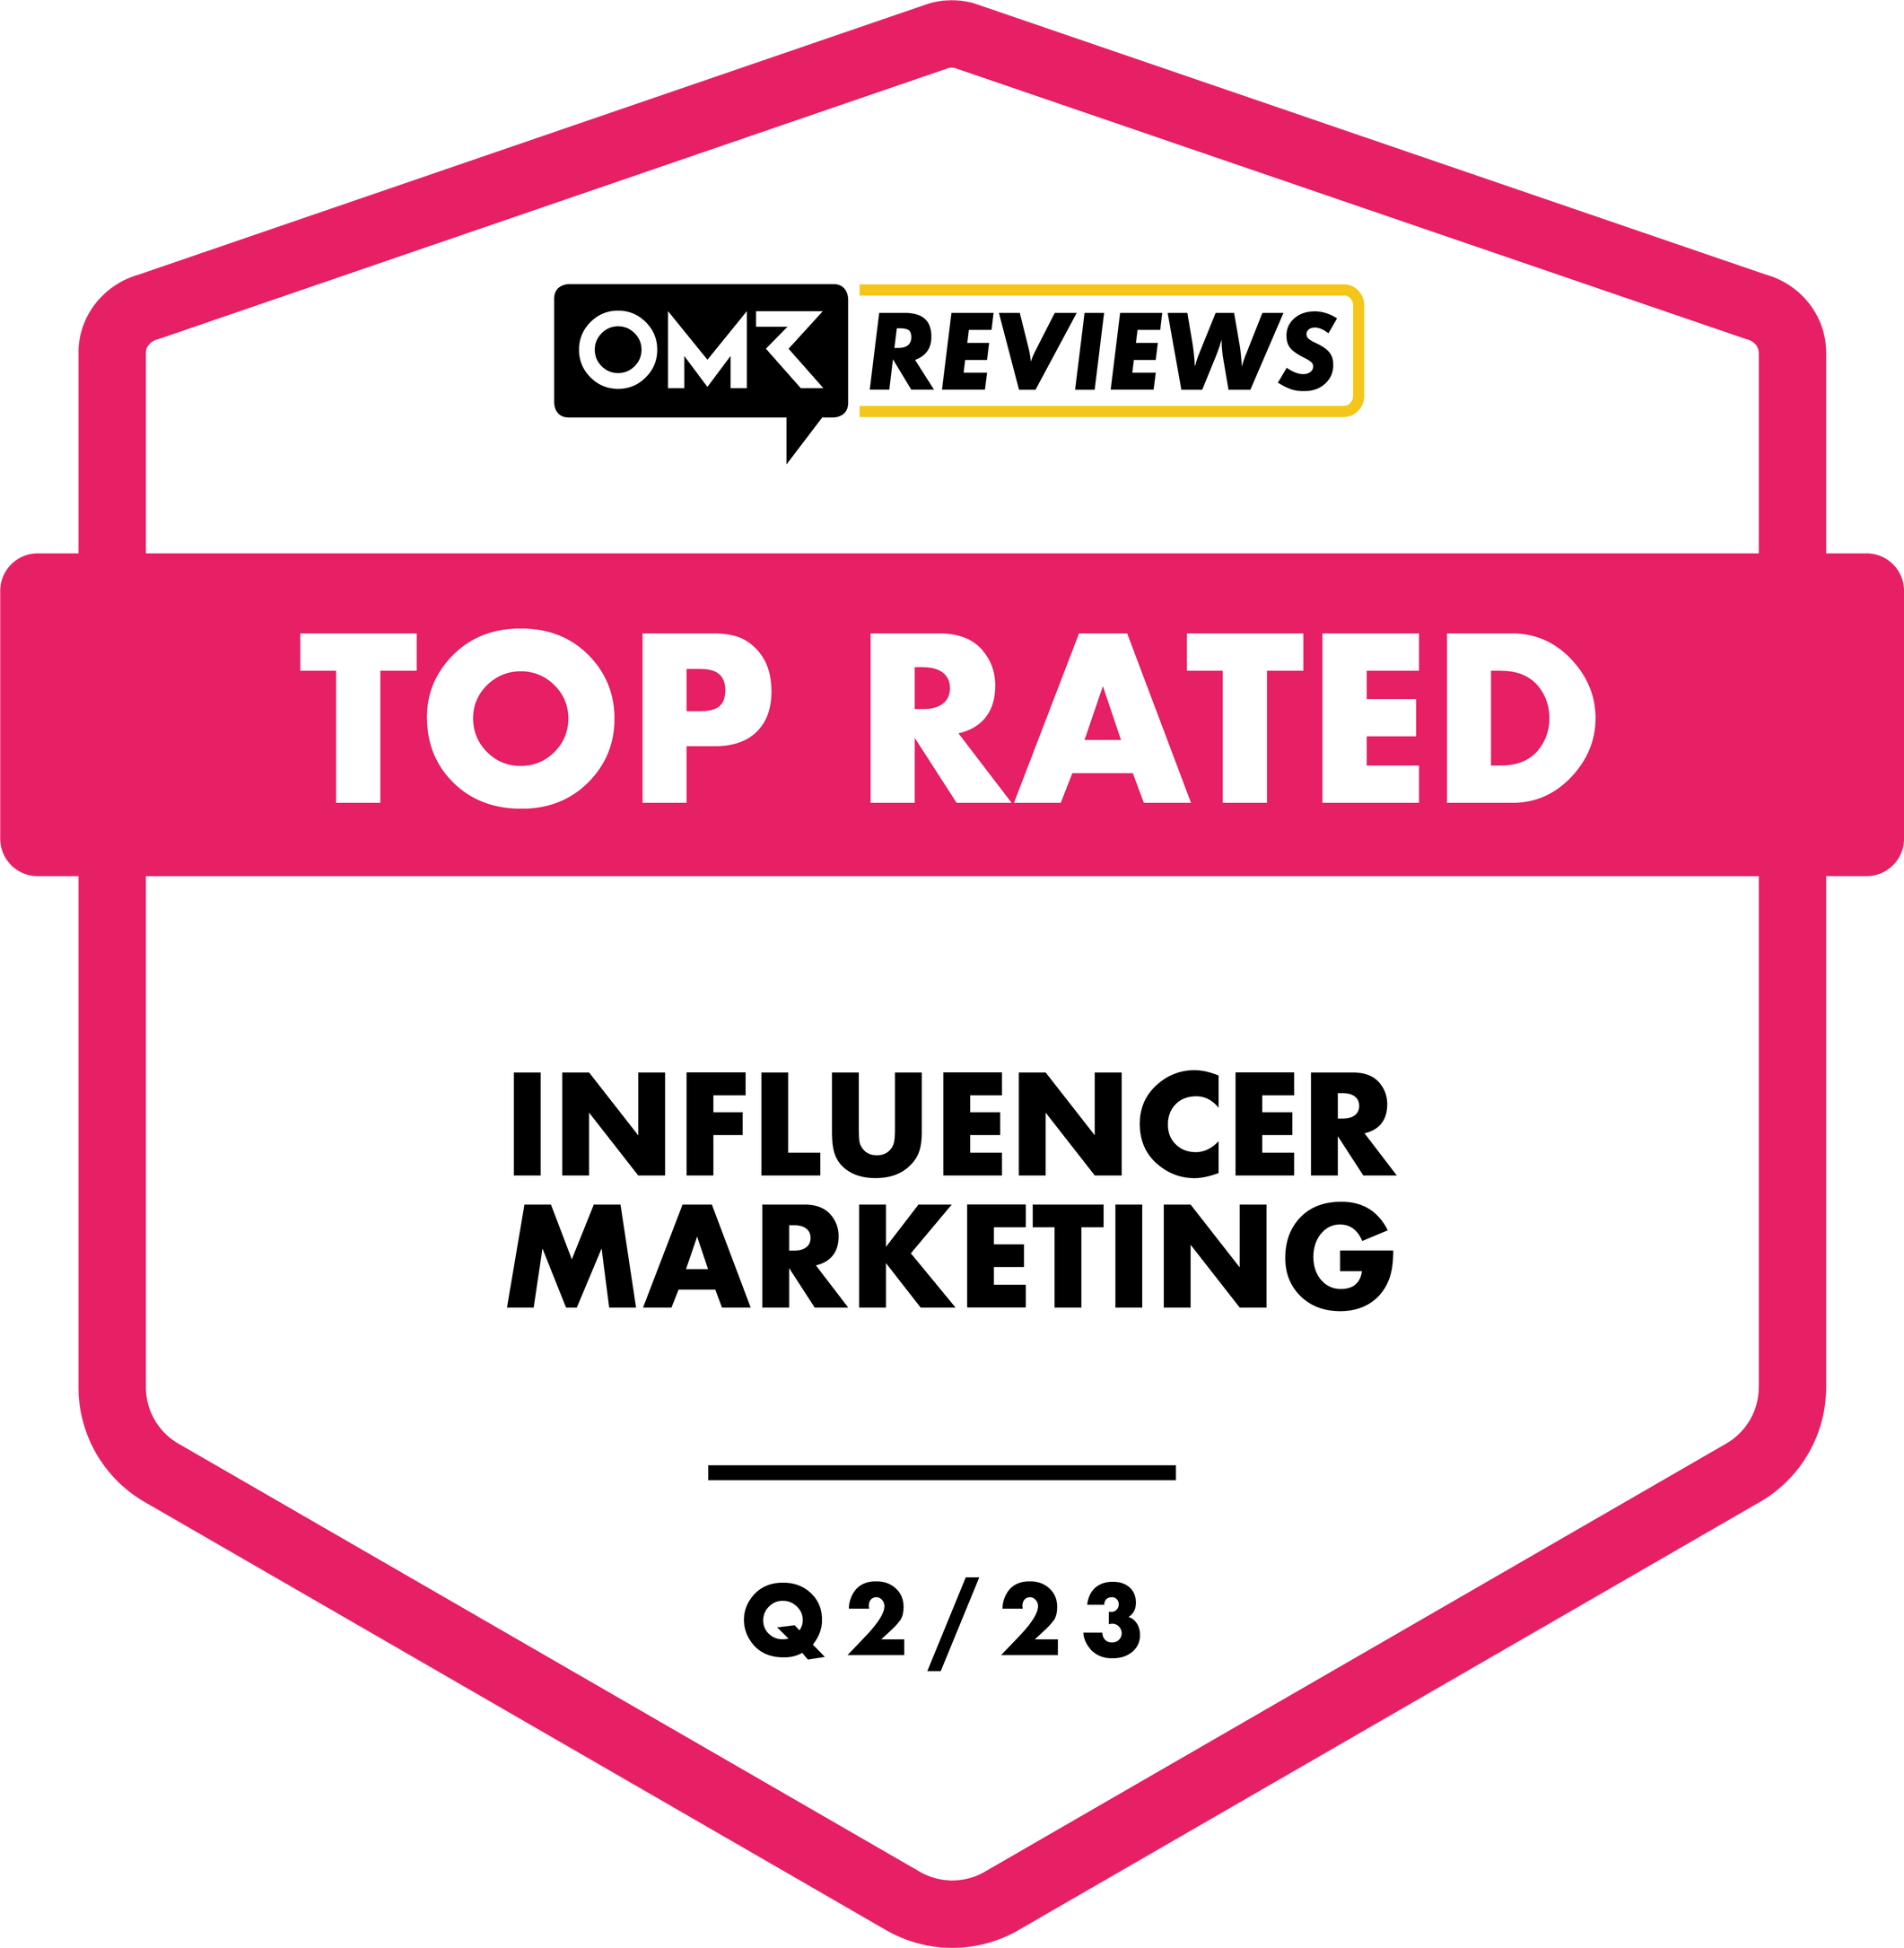 Top Rated by OMR Influencer Marketing Badge